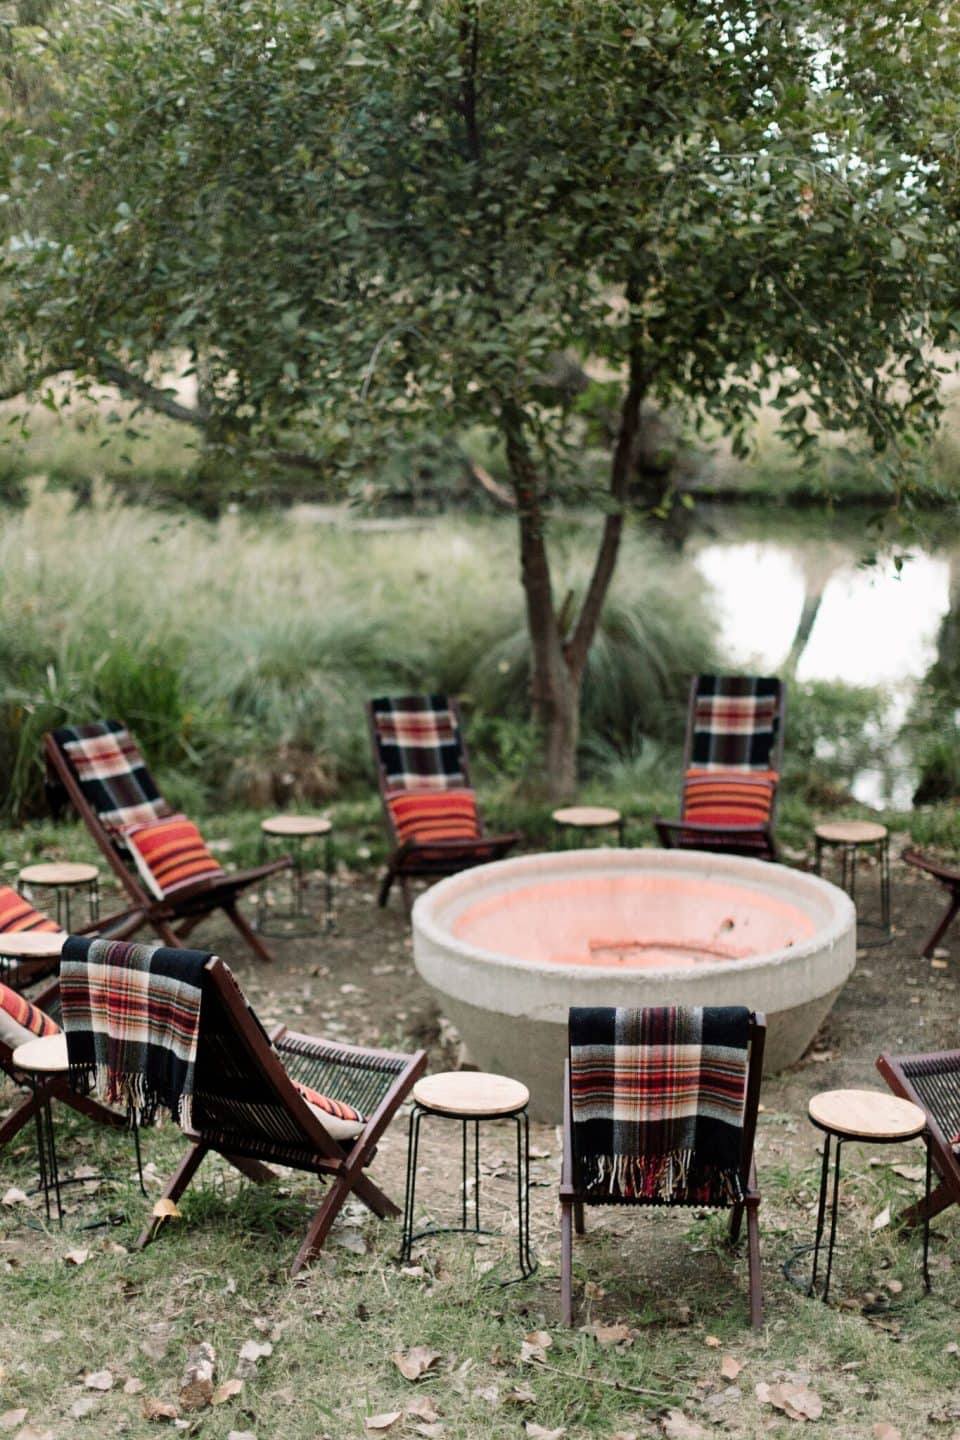 Outdoor decorating ideas featuring firepit with chairs and layered blankets around it